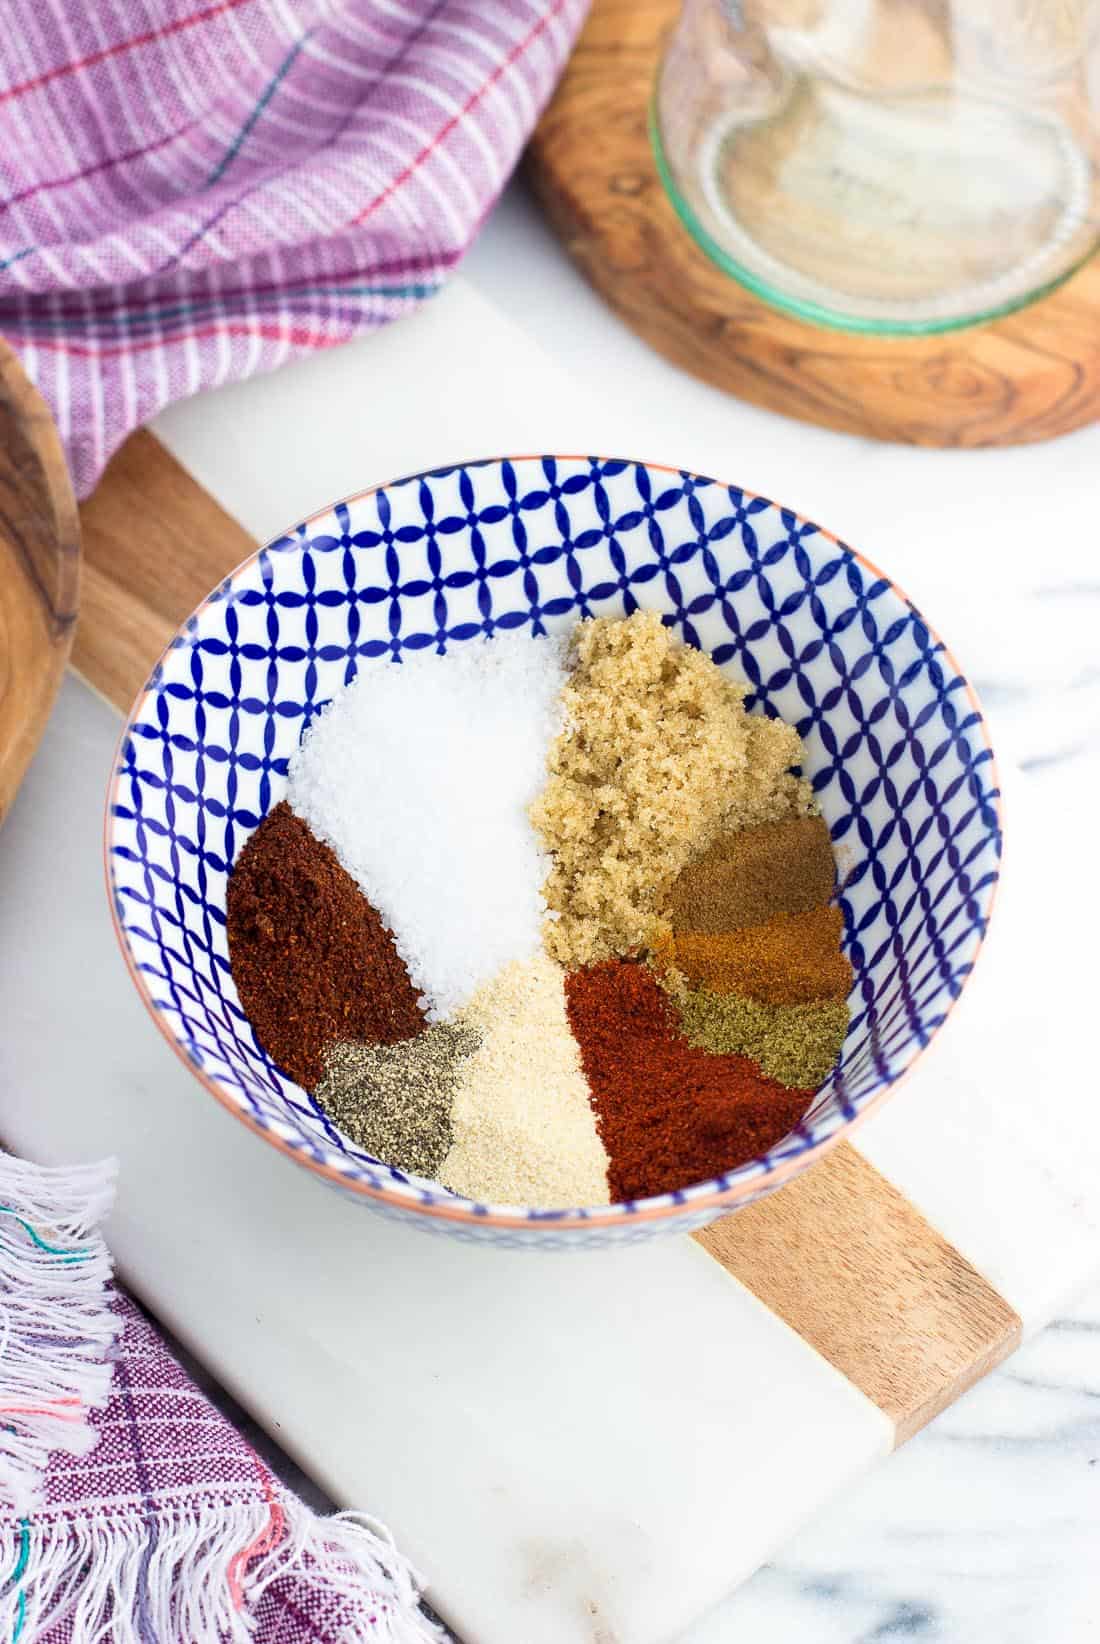 All of the spices for the seasoning rub in a ceramic bowl